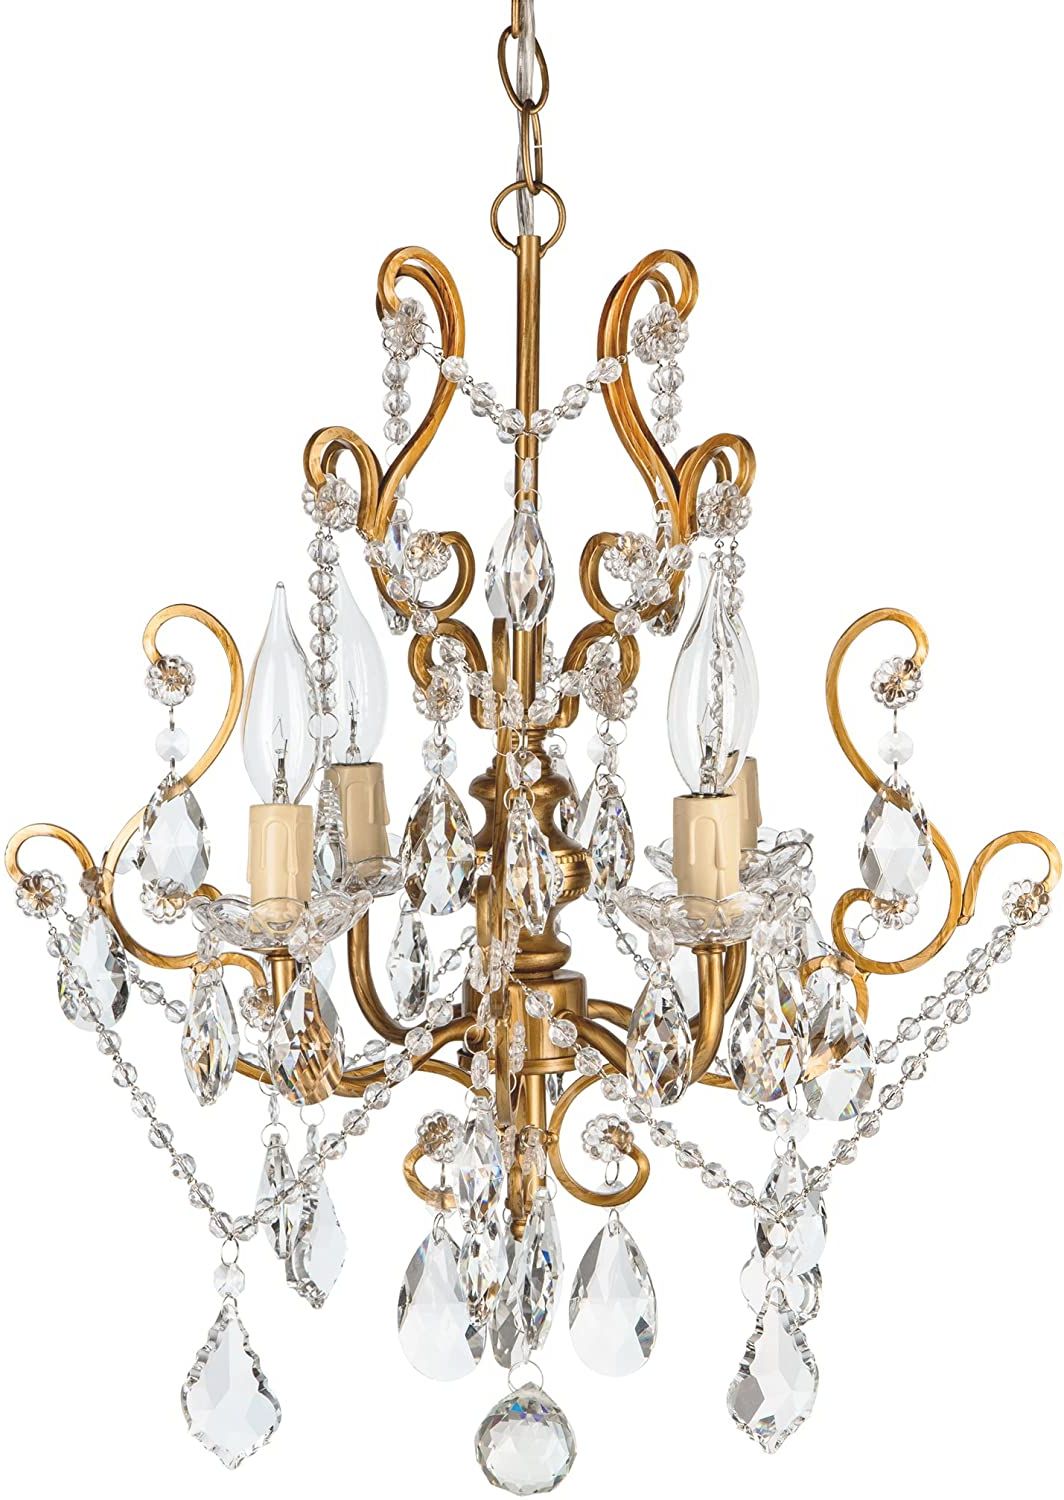 Antique Gold 13 Inch Four Light Chandeliers Intended For Widely Used Amalfi Decor 4 Light Led Crystal Beaded Chandelier, Mini (View 7 of 15)